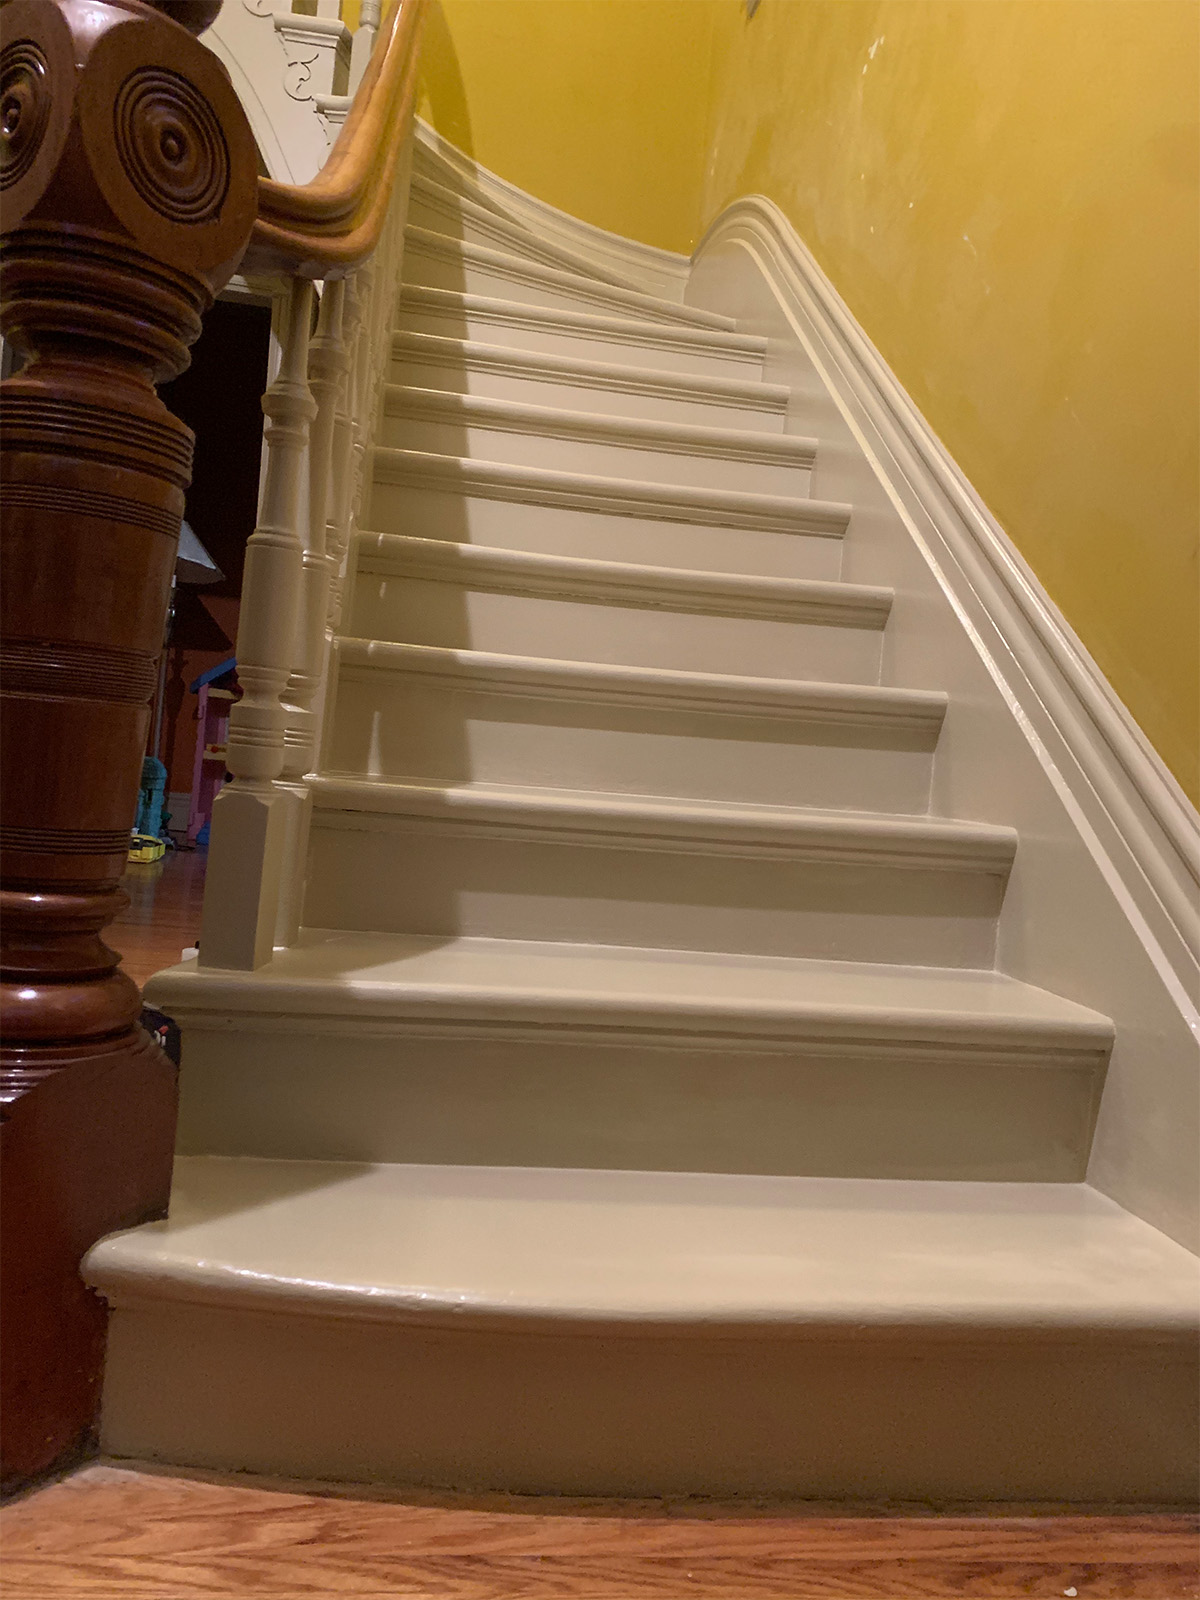 Victorian Home Interior Steps After Painting